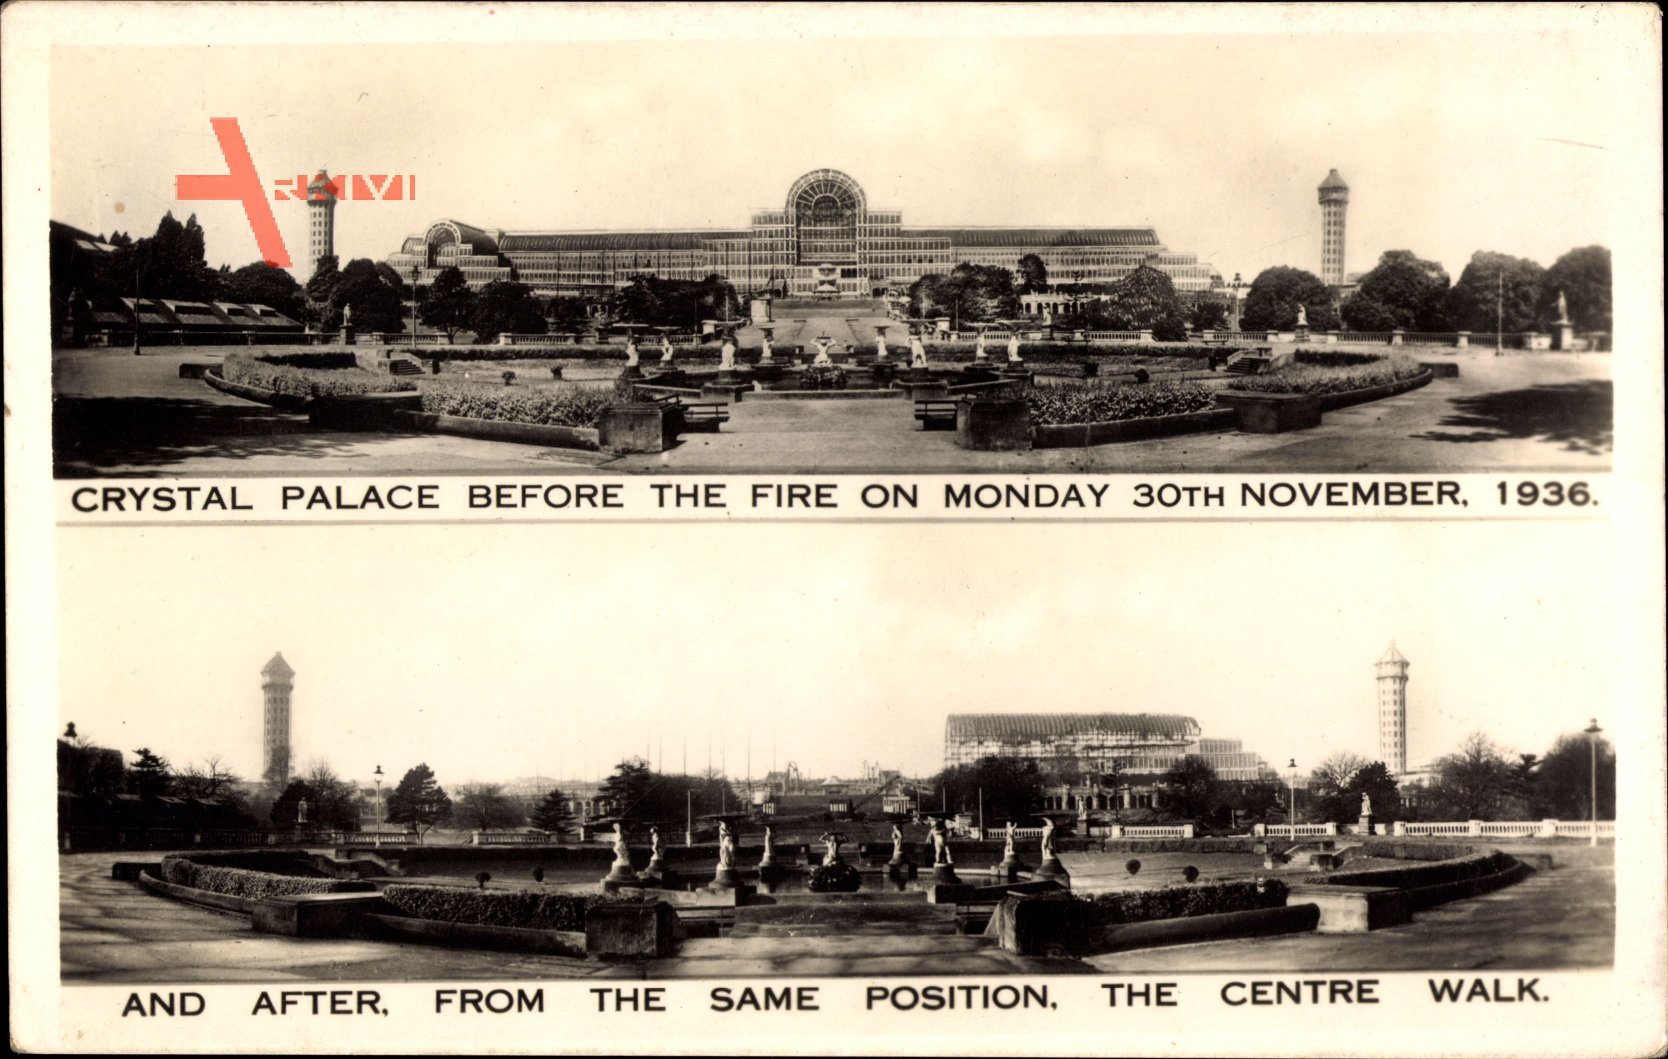 London City, Crystal Palace before and after the fire, 30 November 1936